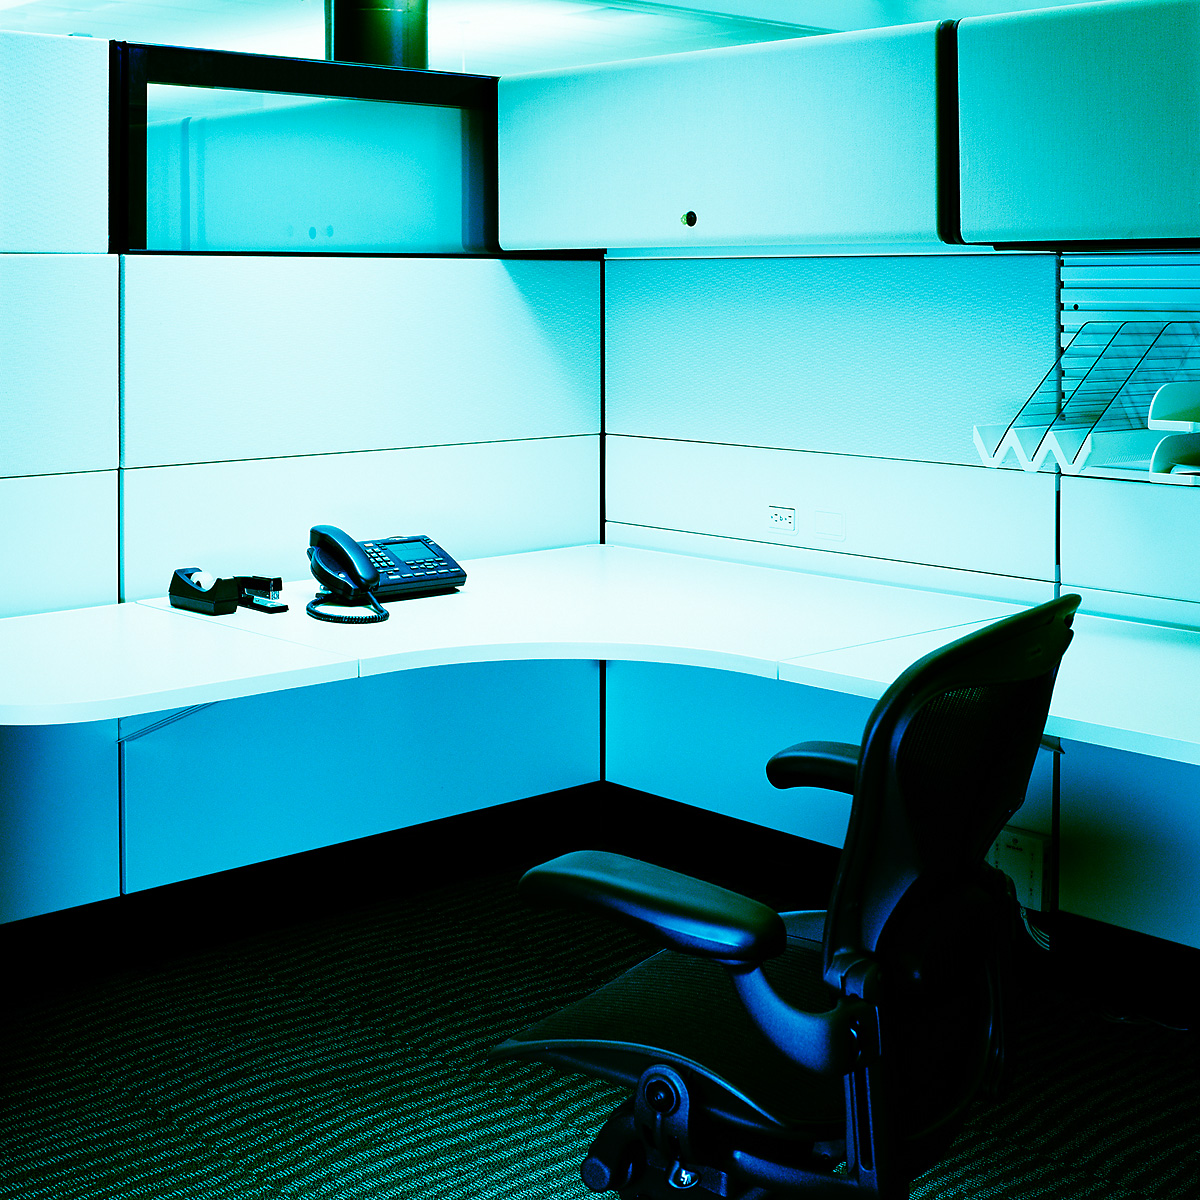 cubicle-stephen-austin-welch-director-photographer